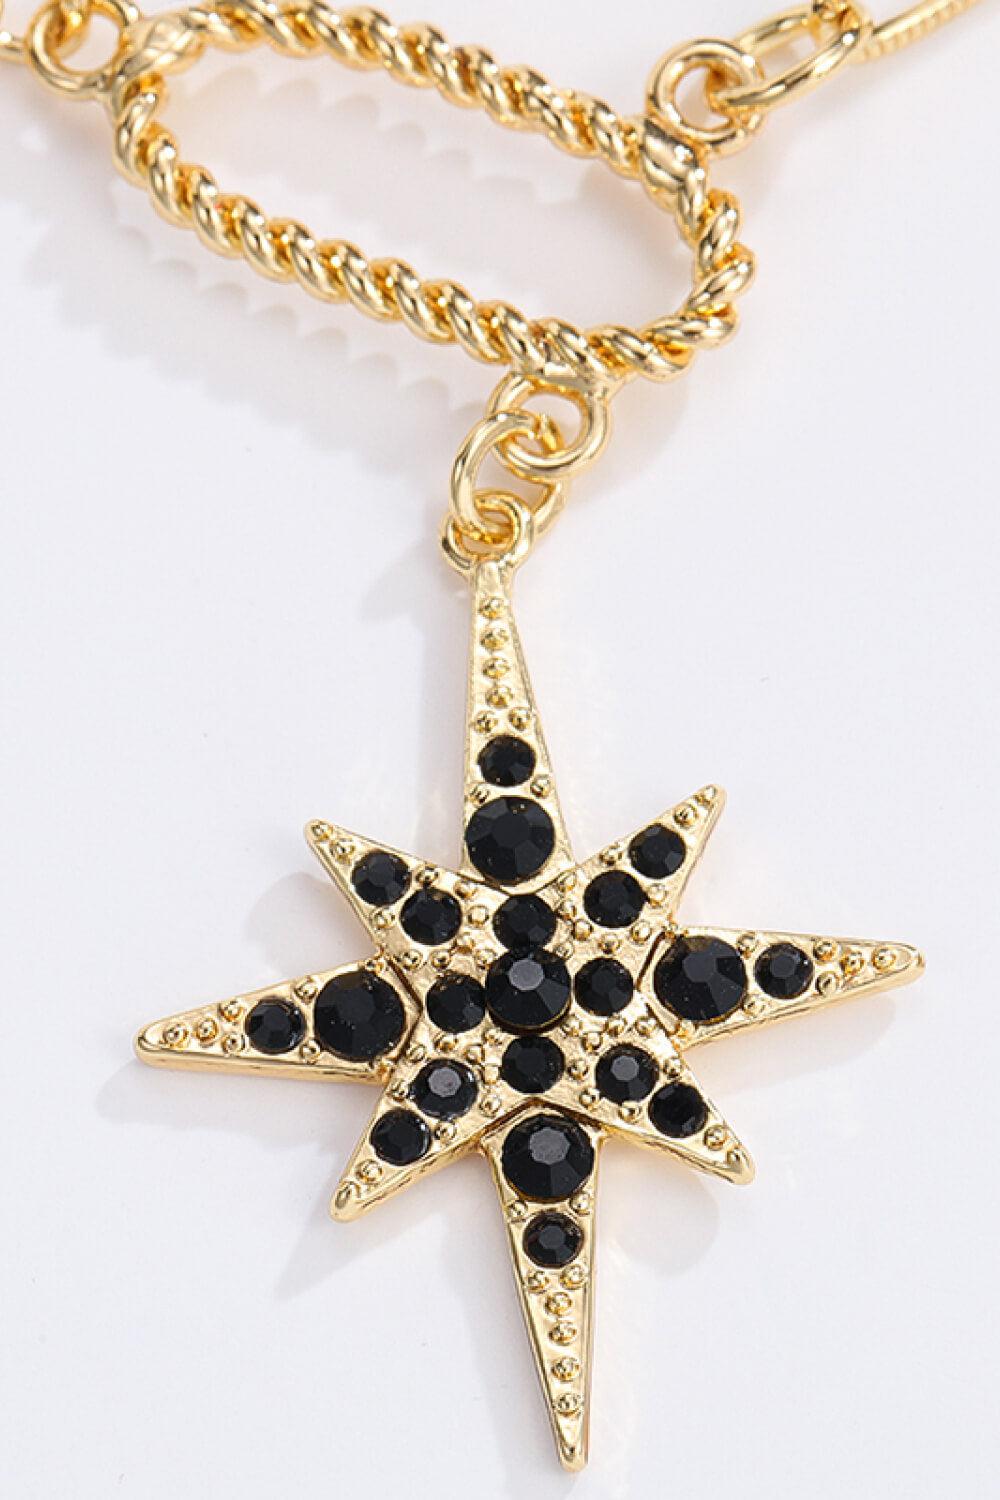 Star and Moon Rhinestone Alloy Necklace BLUE ZONE PLANET